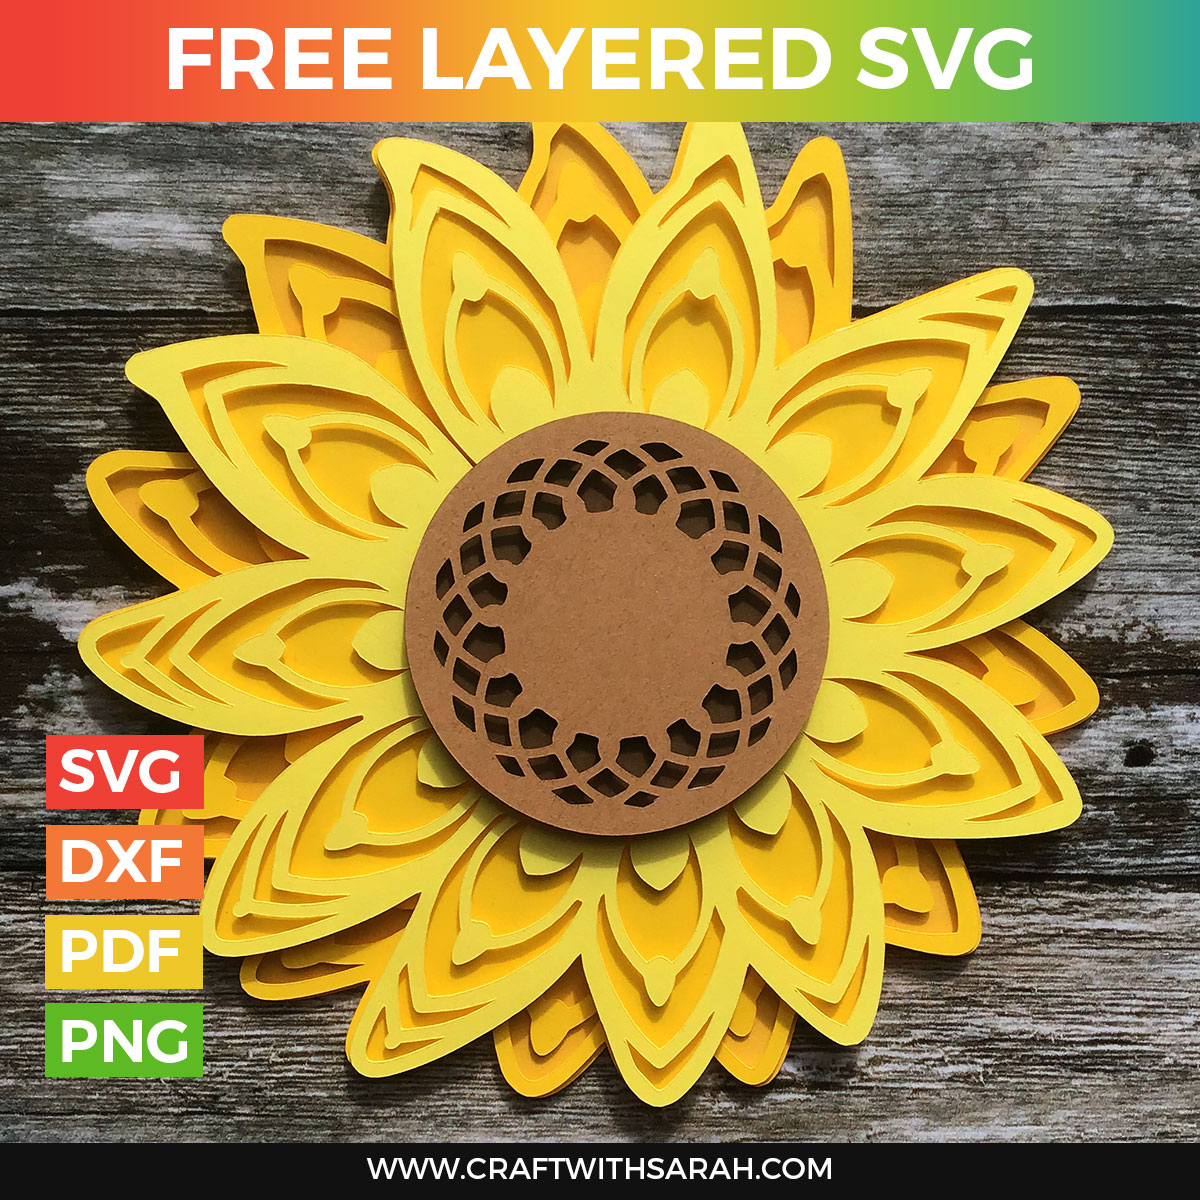 Download 46+ Sunflower Mandala Svg Free Pictures Free SVG files ...